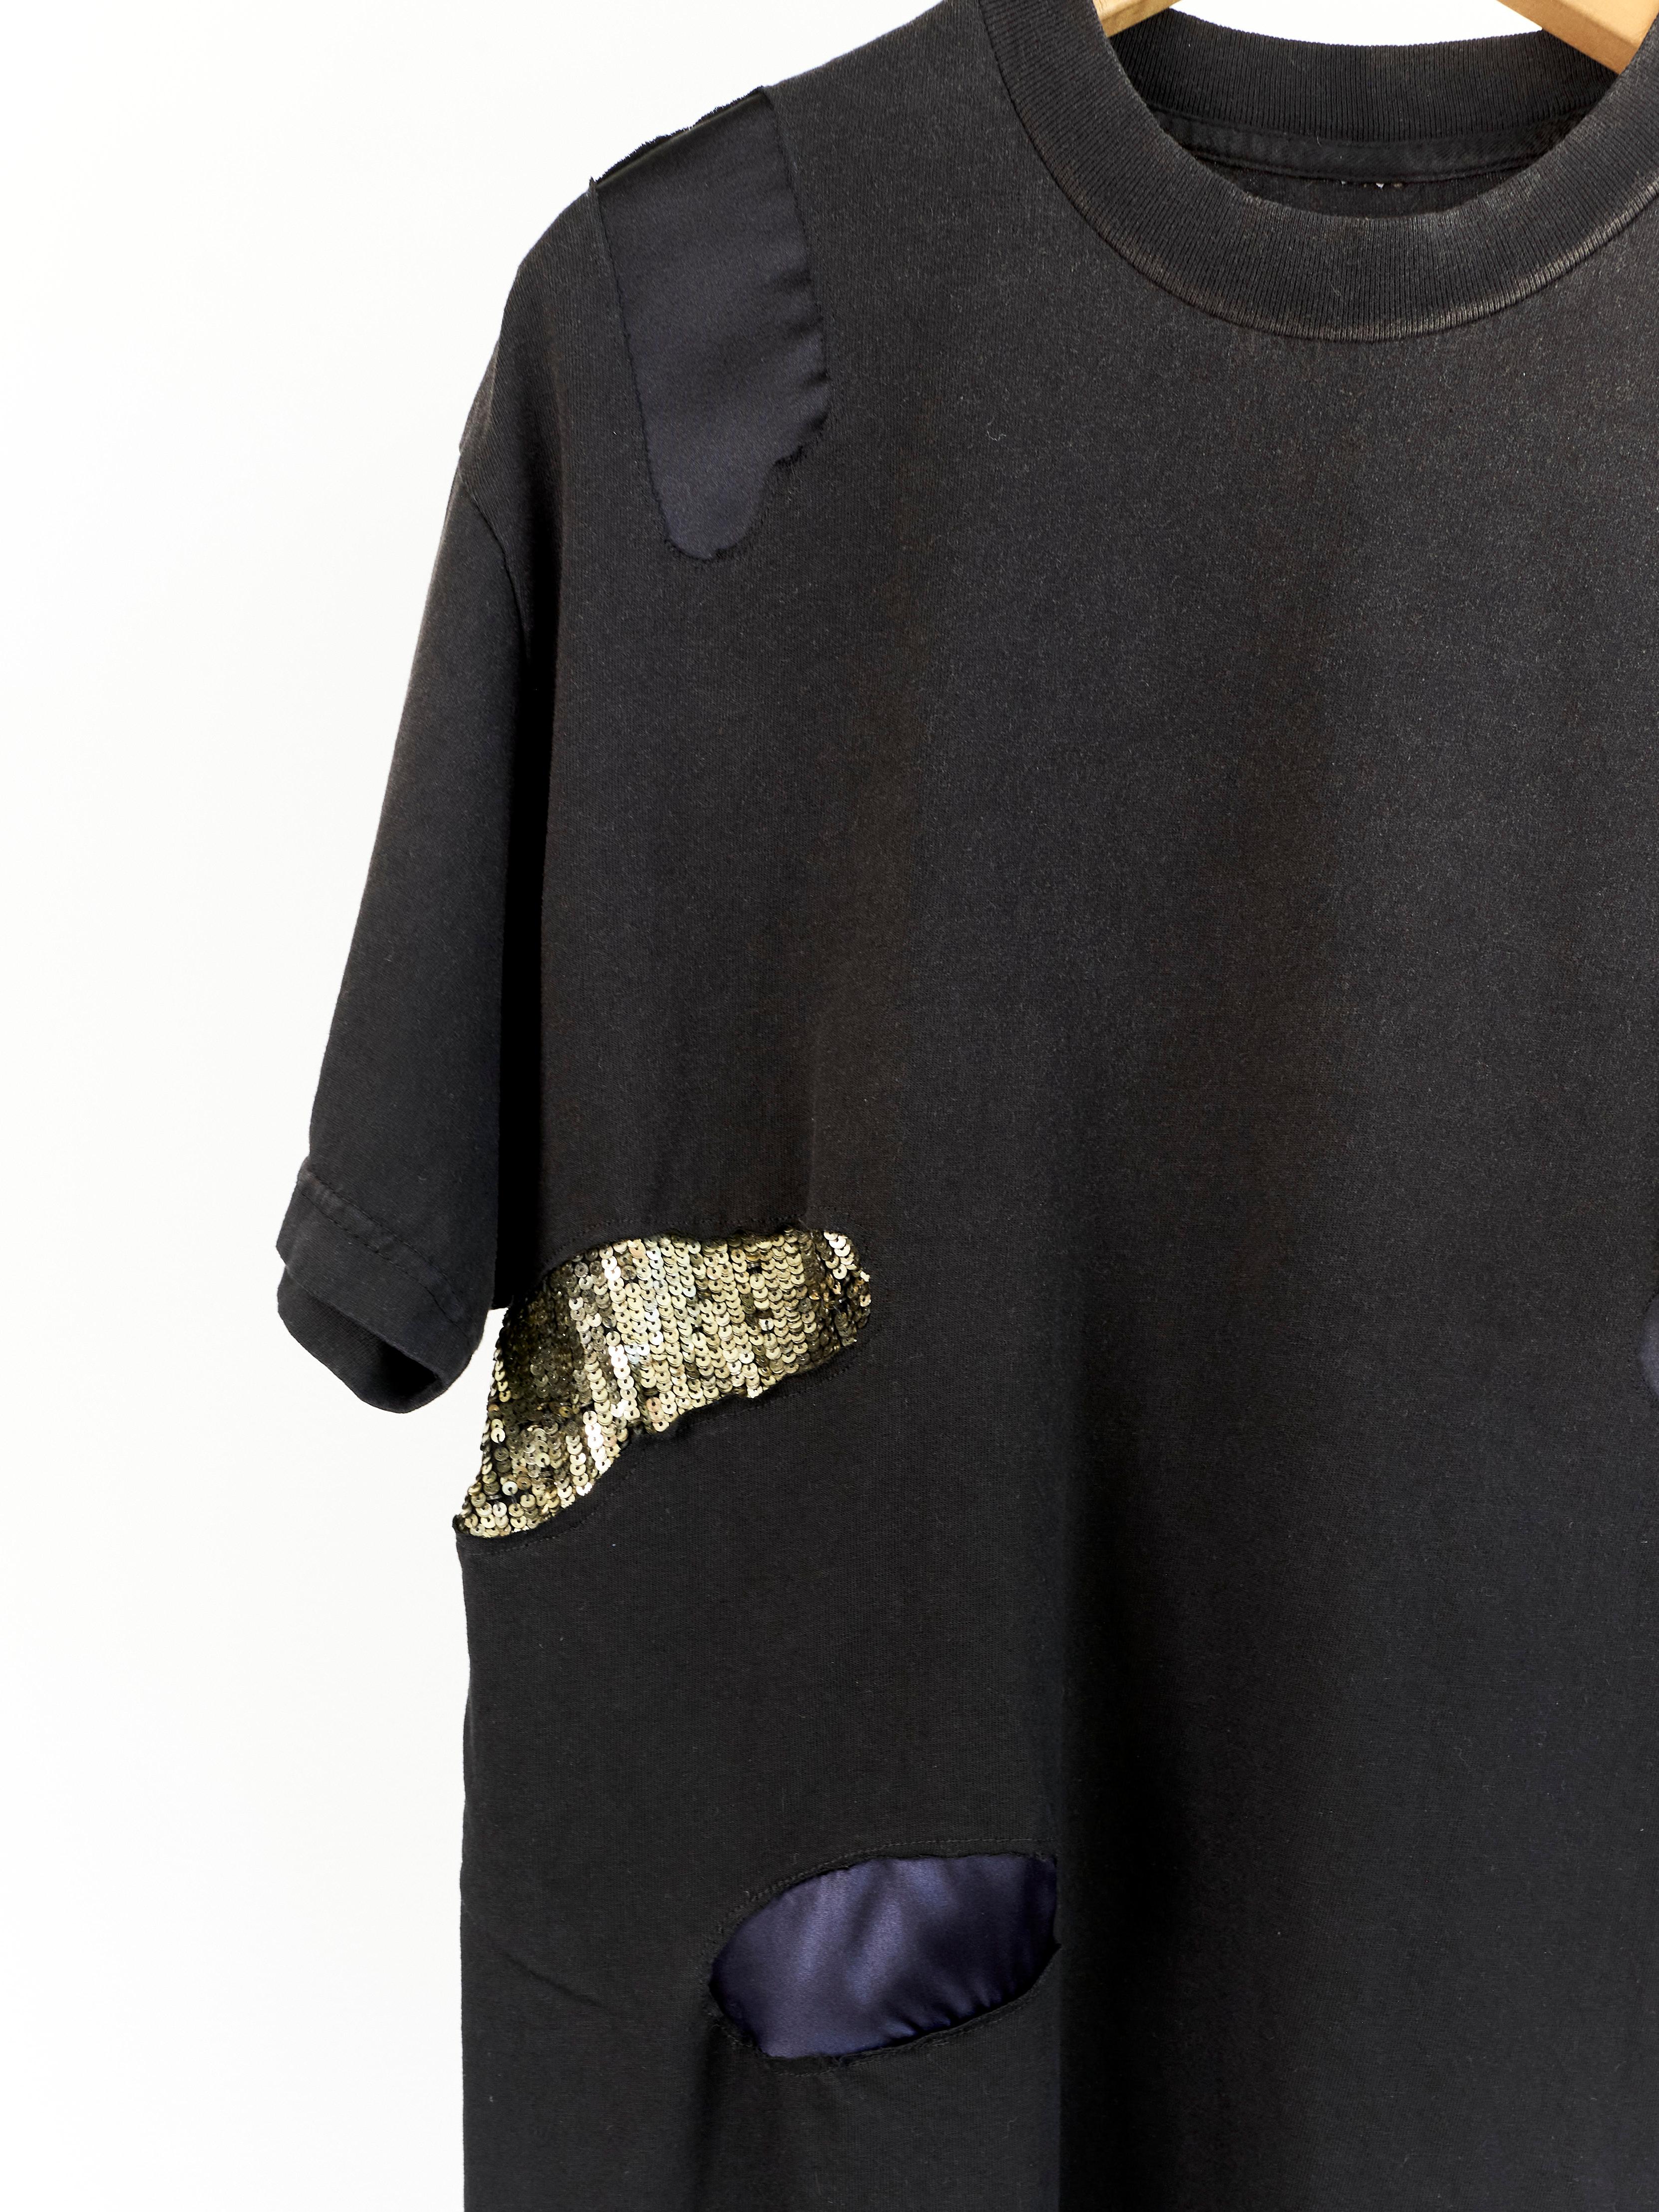 J Dauphin Distressed Black T-Shirt Embellished  Patch Work Sequin Silk Body 100% Cotton 

J Dauphin was created 2006 by Swedish French Johanna Dauphin. She started her career working for LVMH owned Fend at the Italian head office in Rome. She later